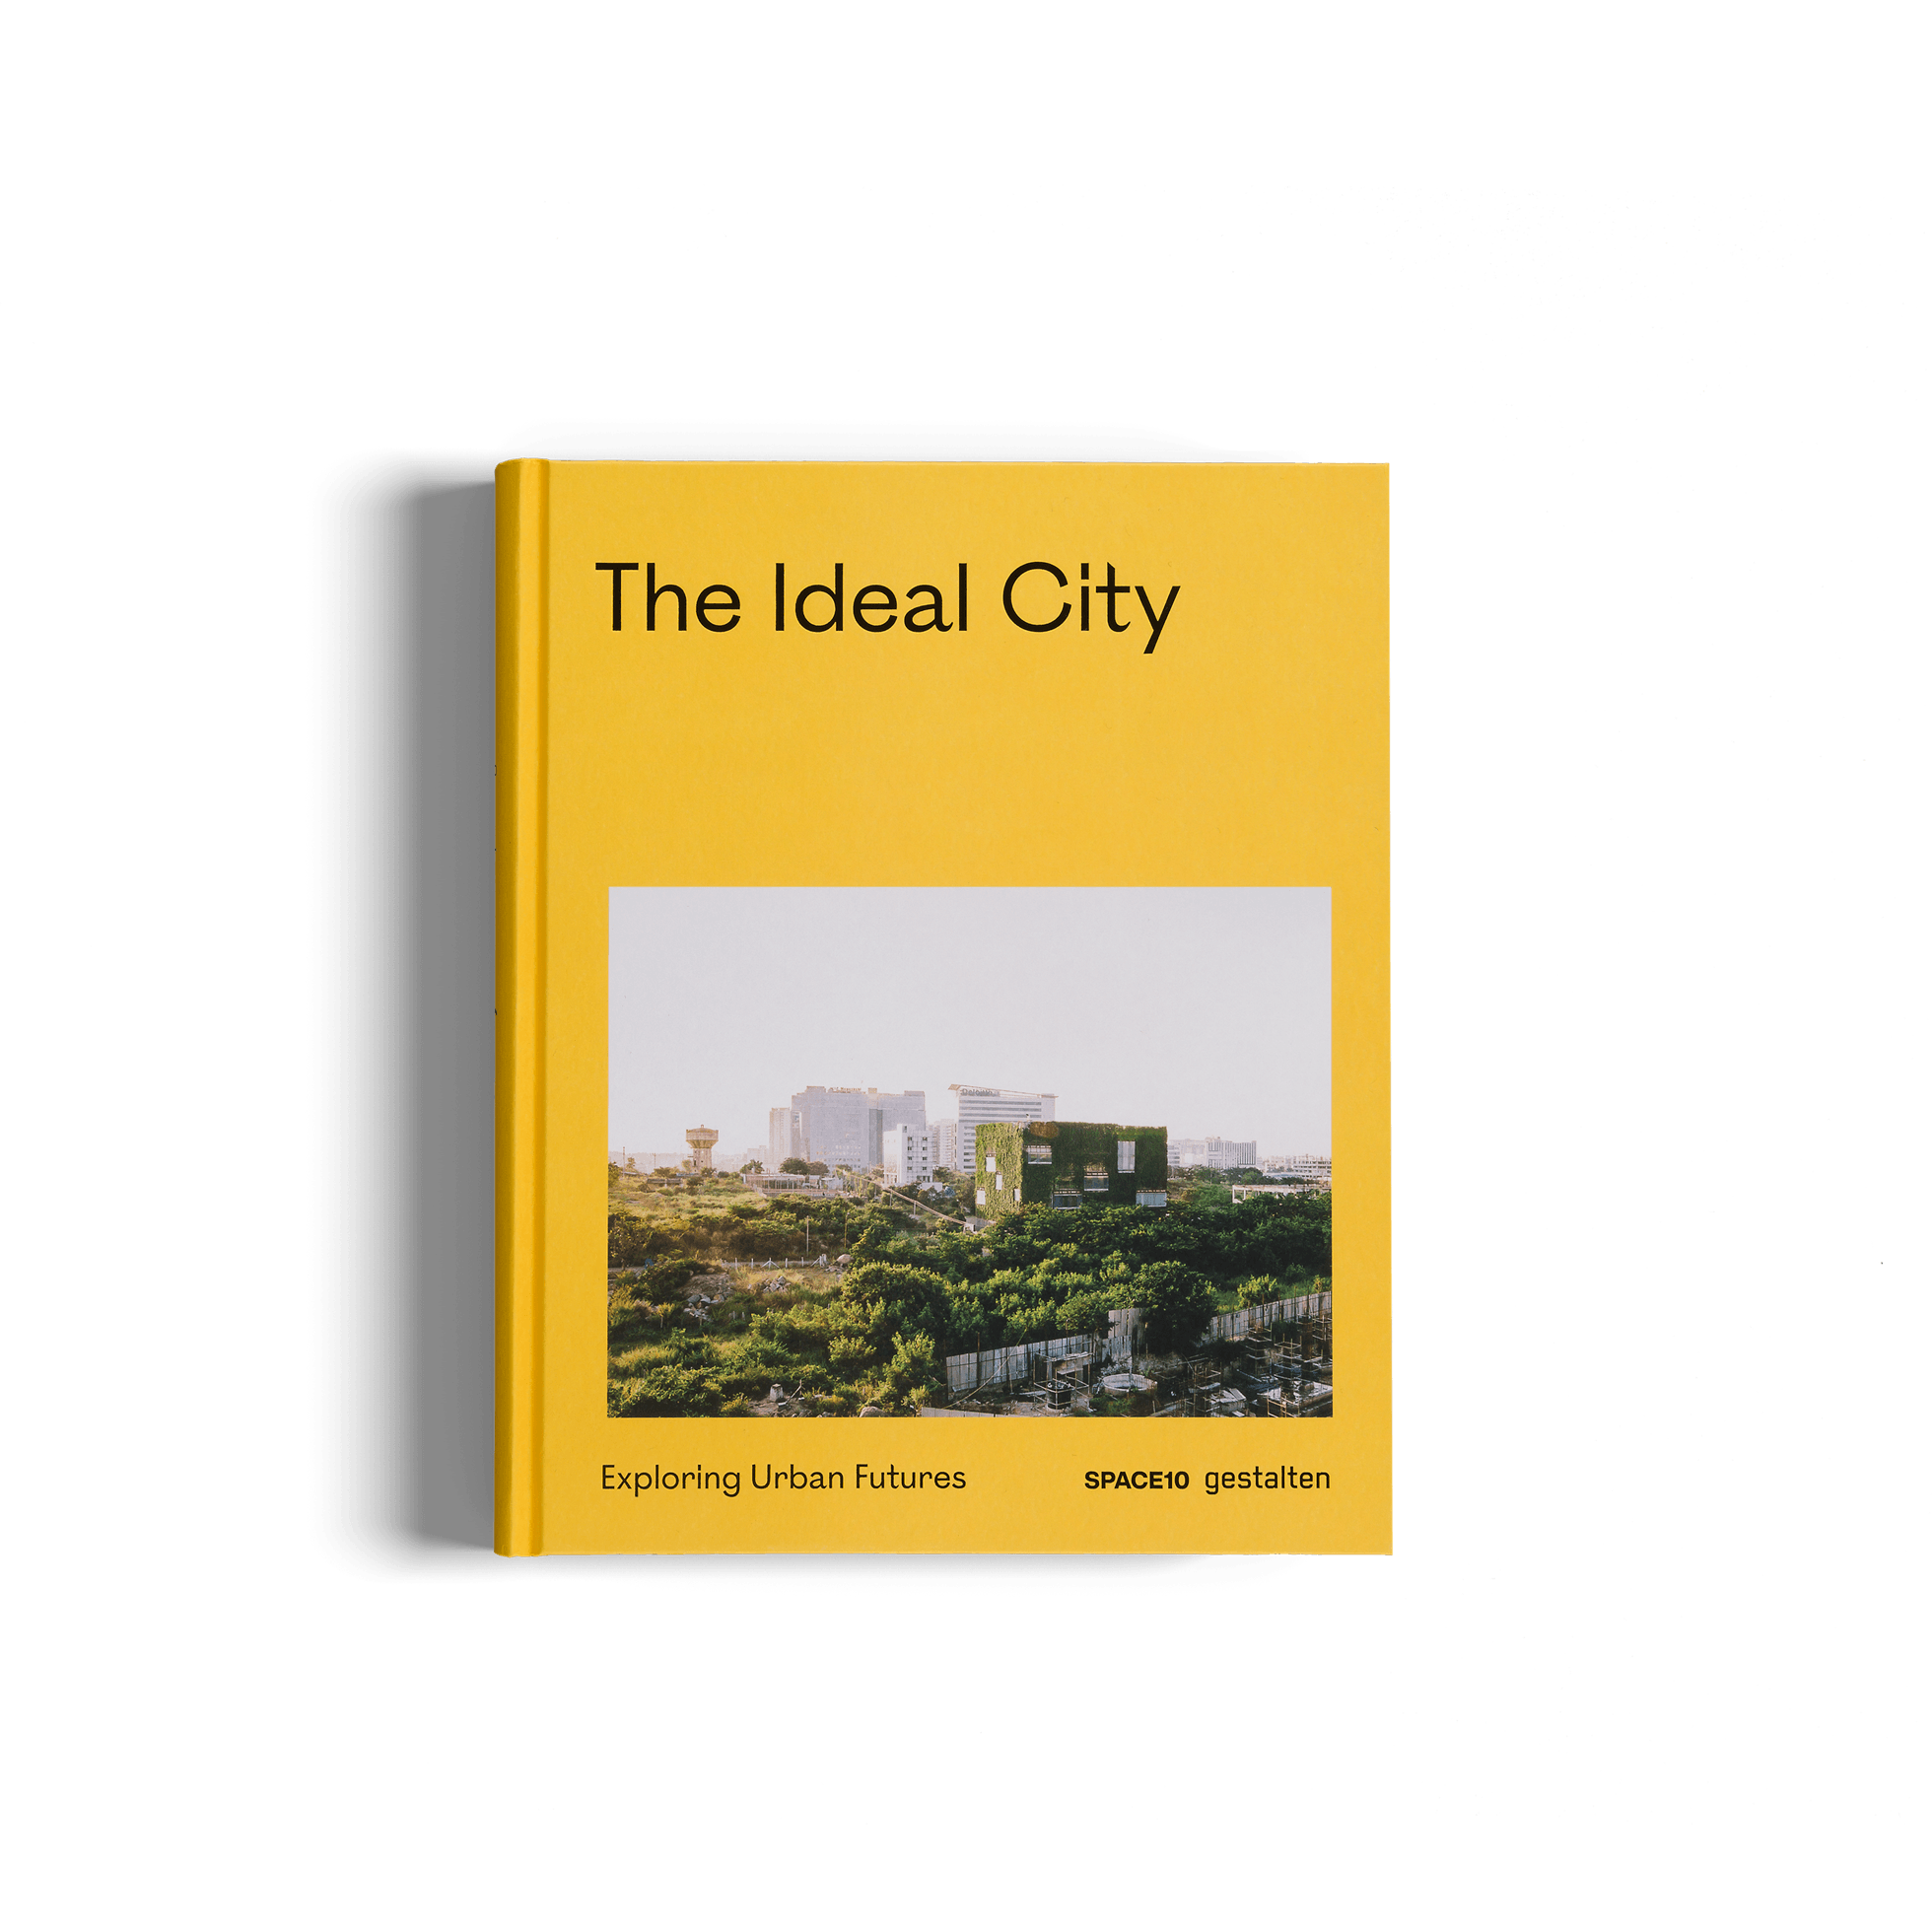 The Ideal City